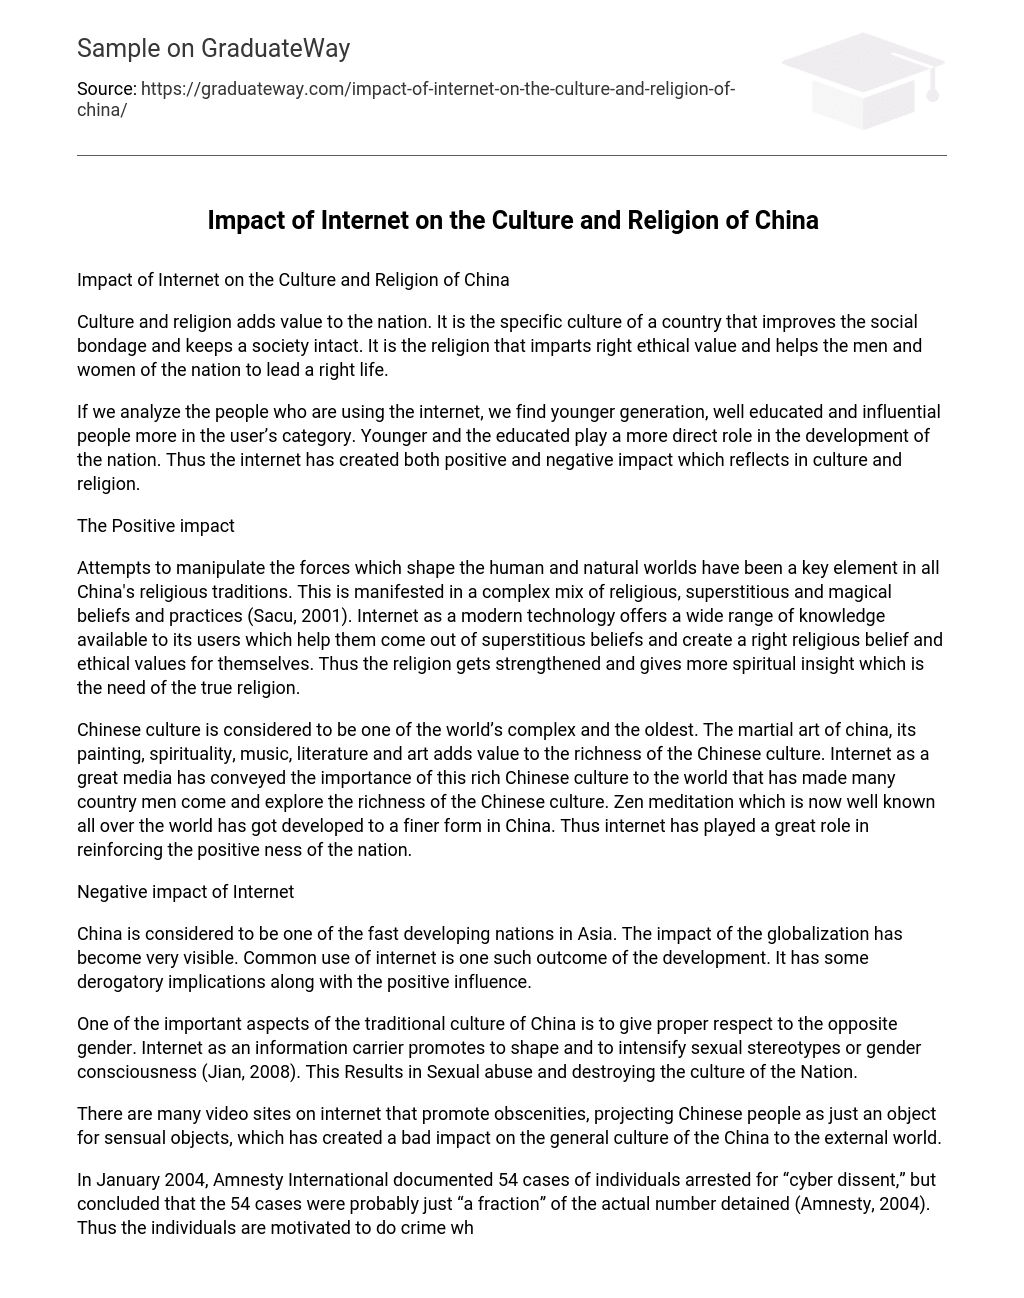 Impact of Internet on the Culture and Religion of China